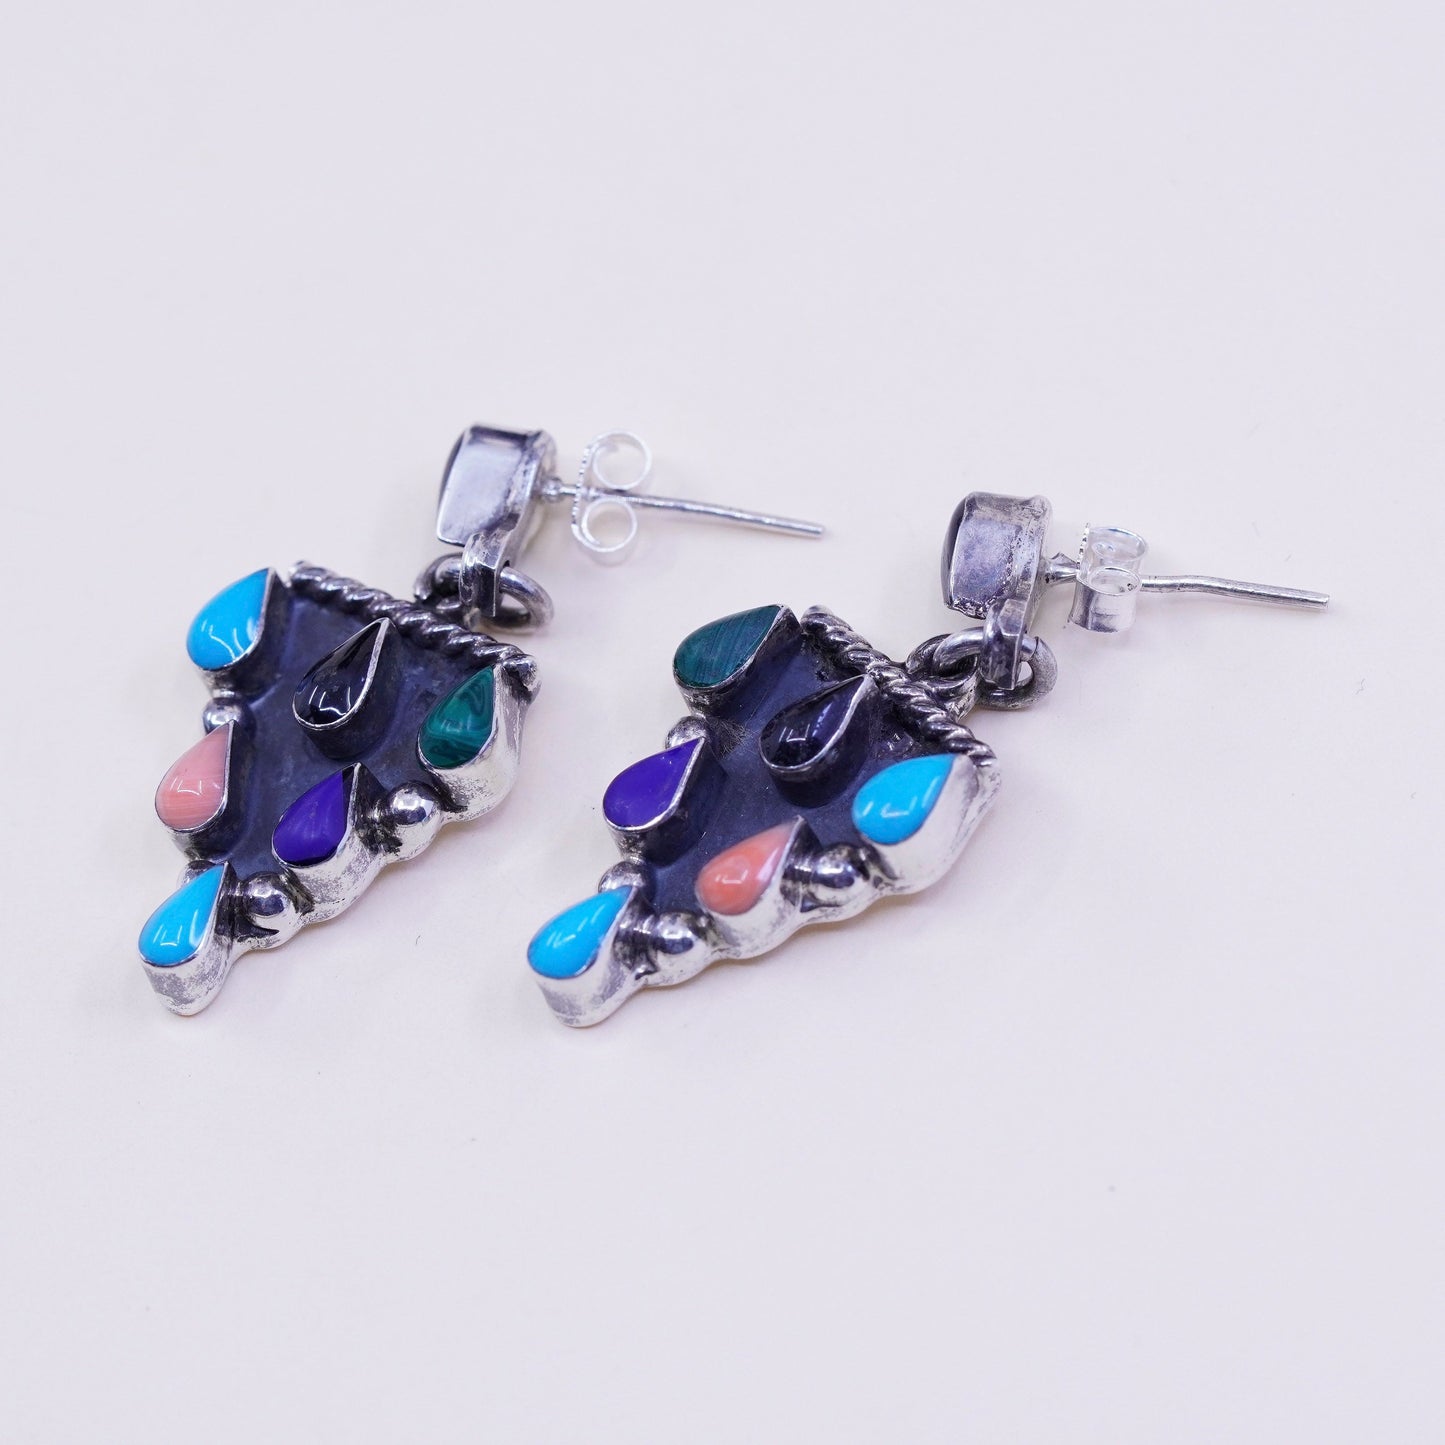 Vintage Sterling 925 silver handmade earrings with onyx, coral and malachite, stamped 925 mexico TJ-51